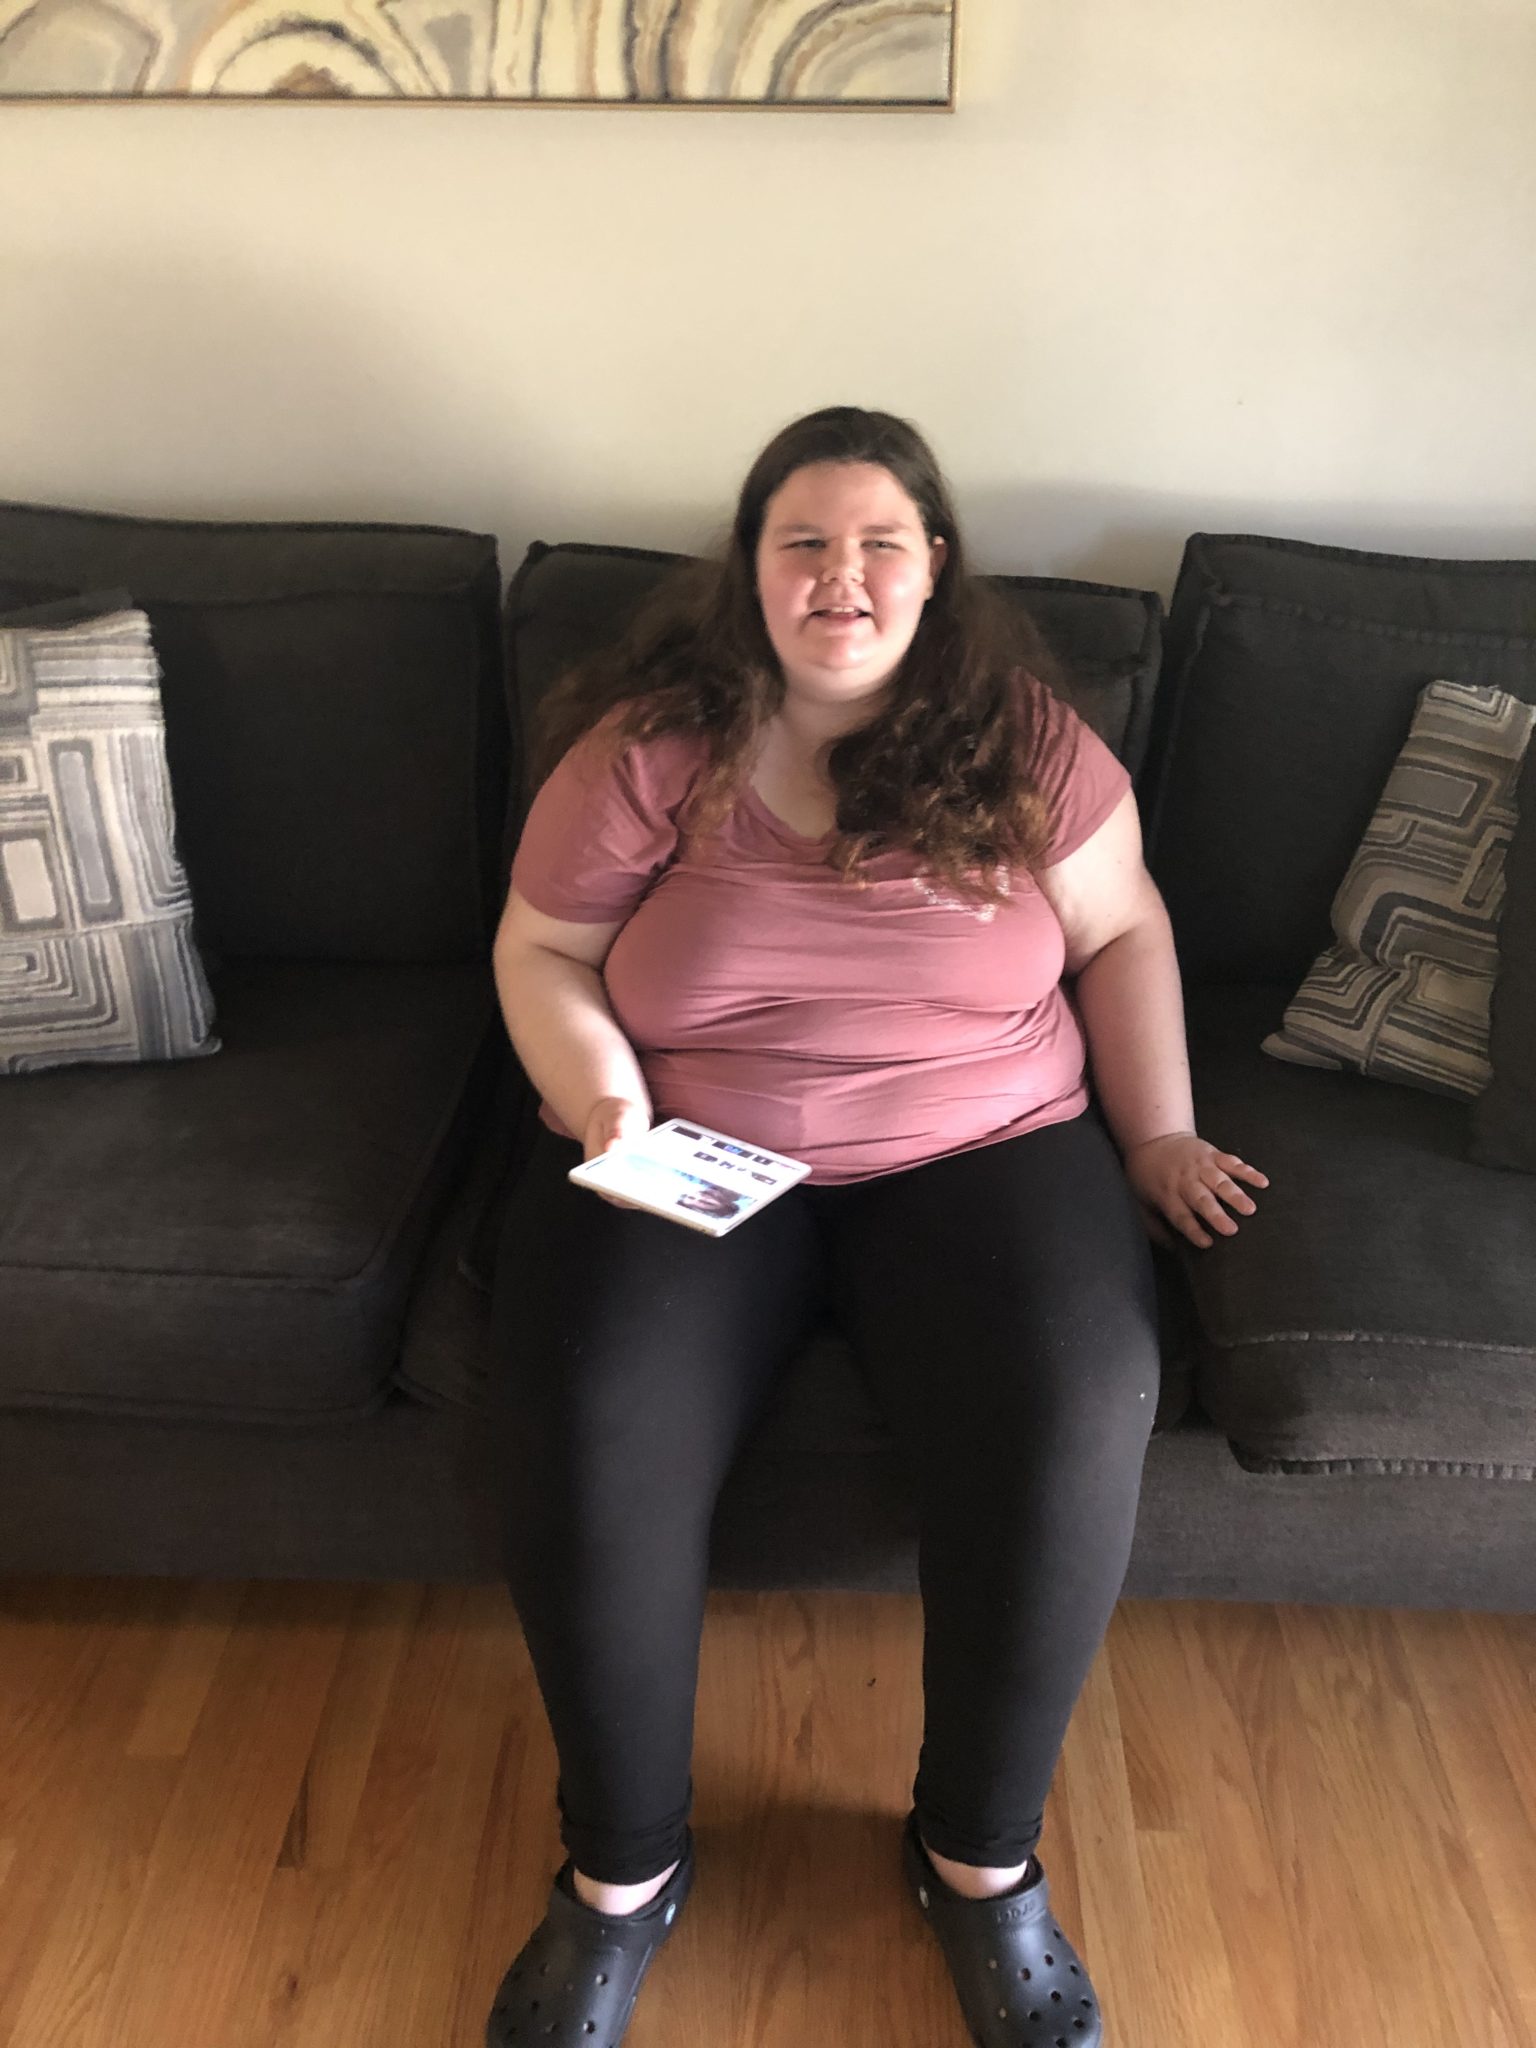 Rachel sitting on a comfy couch